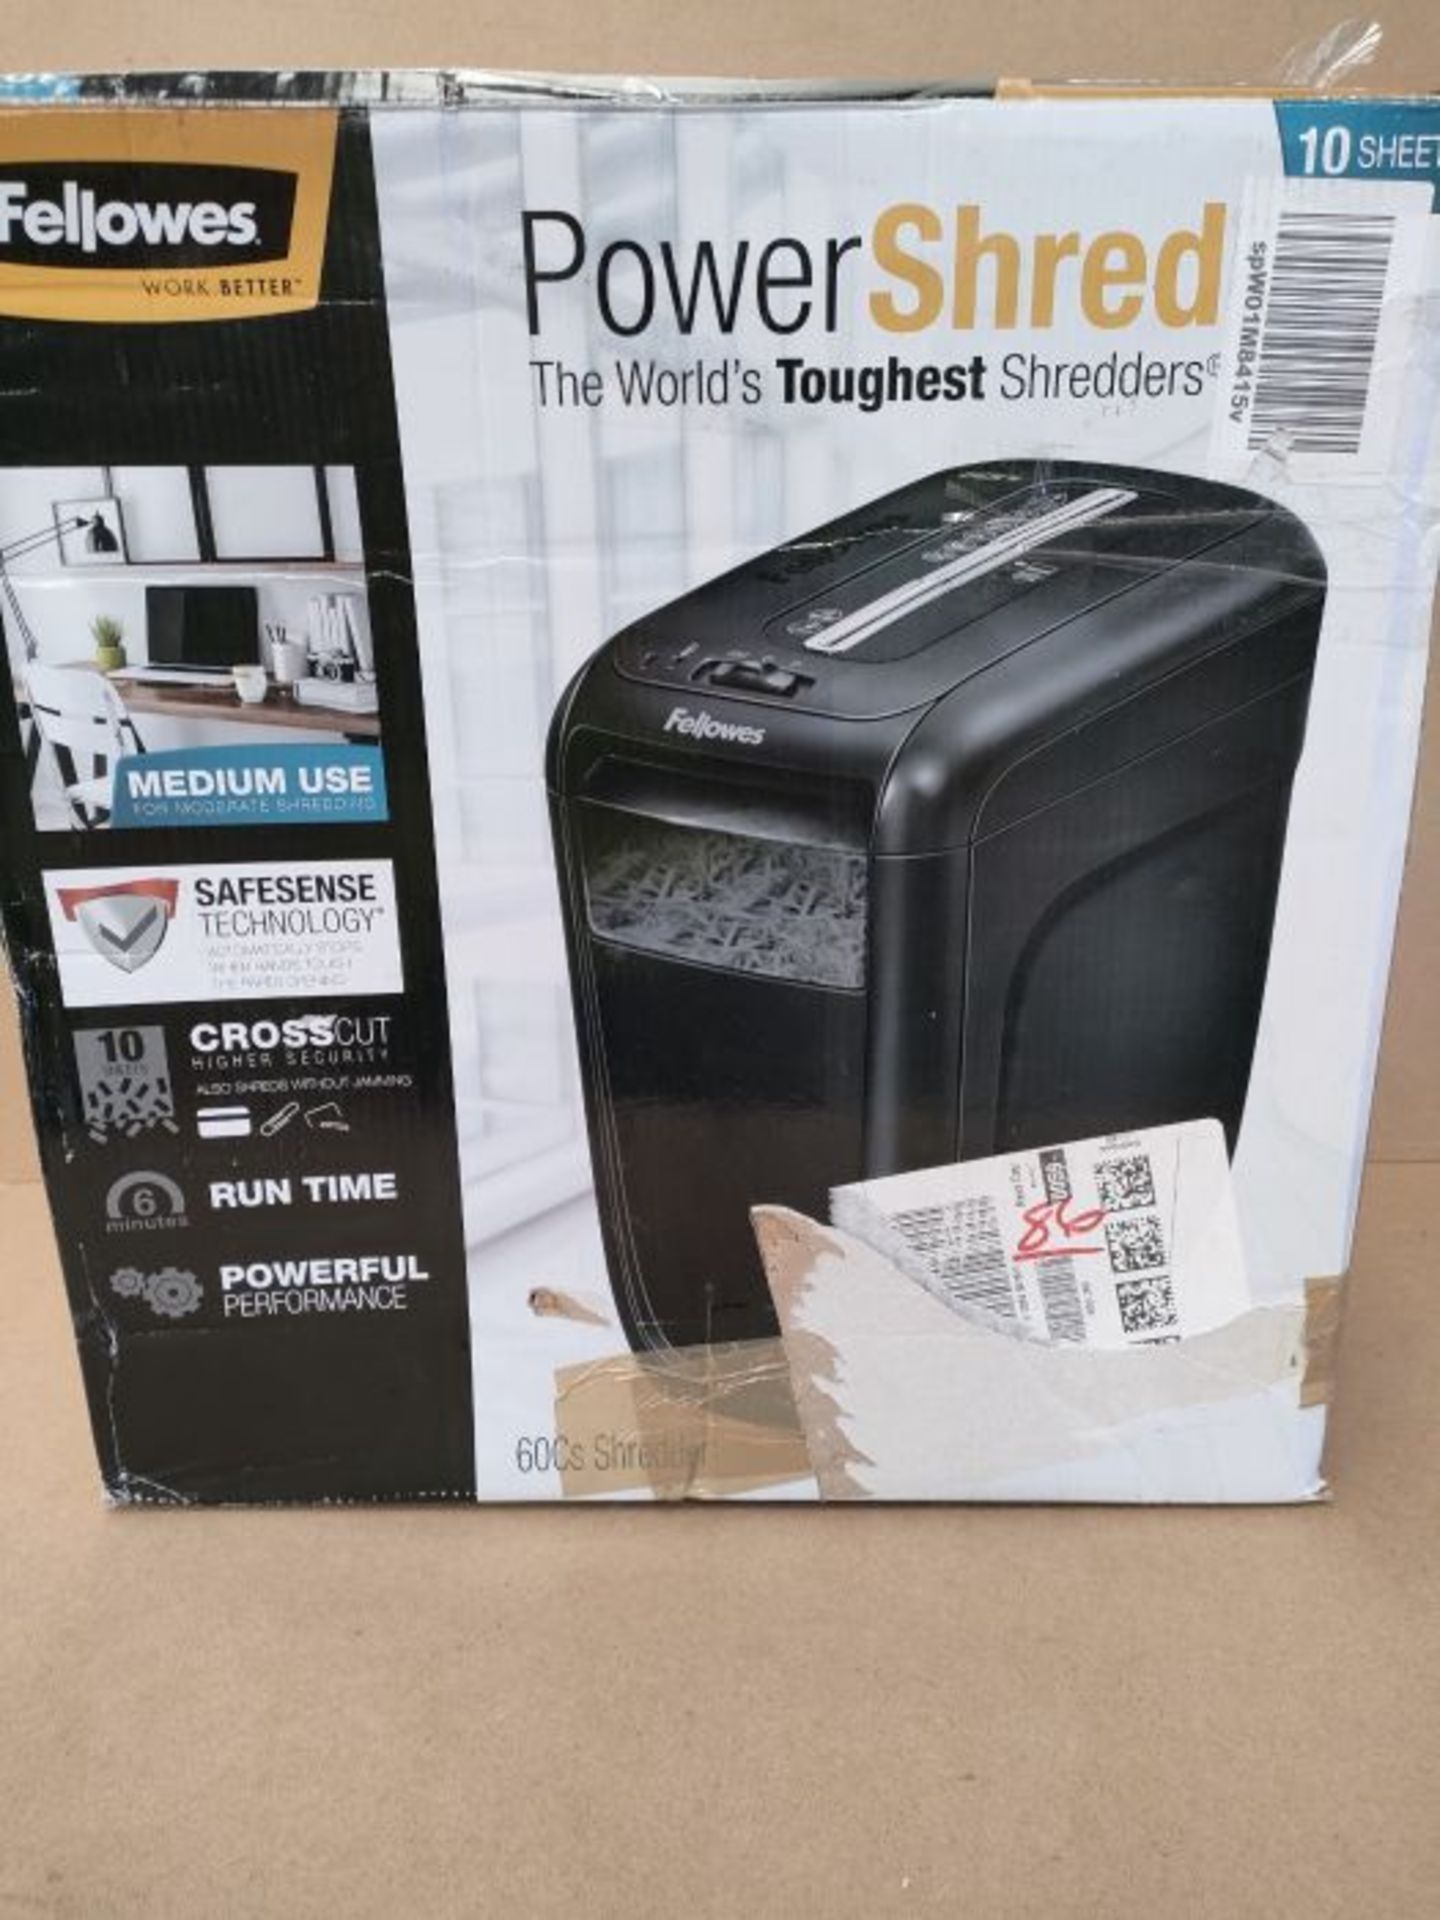 RRP £66.00 Fellowes 4606001 60Cs 10-Sheet Paper, Credit Card Shredder with Safety Features - Image 2 of 3